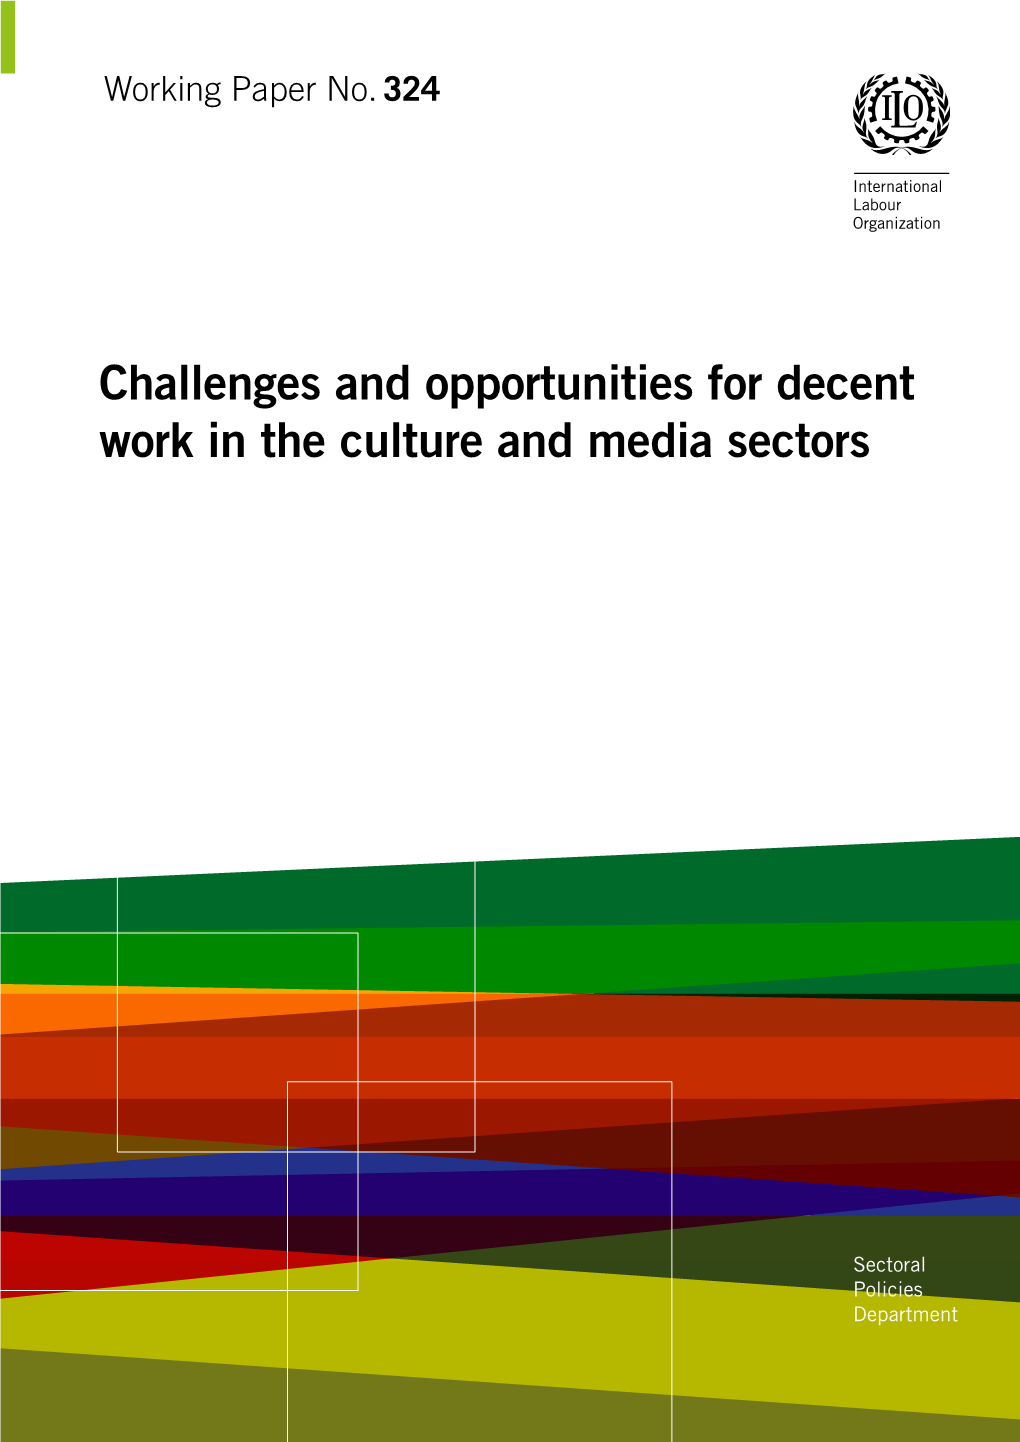 Challenges and Opportunities for Decent Work in the Culture and Media Sectors